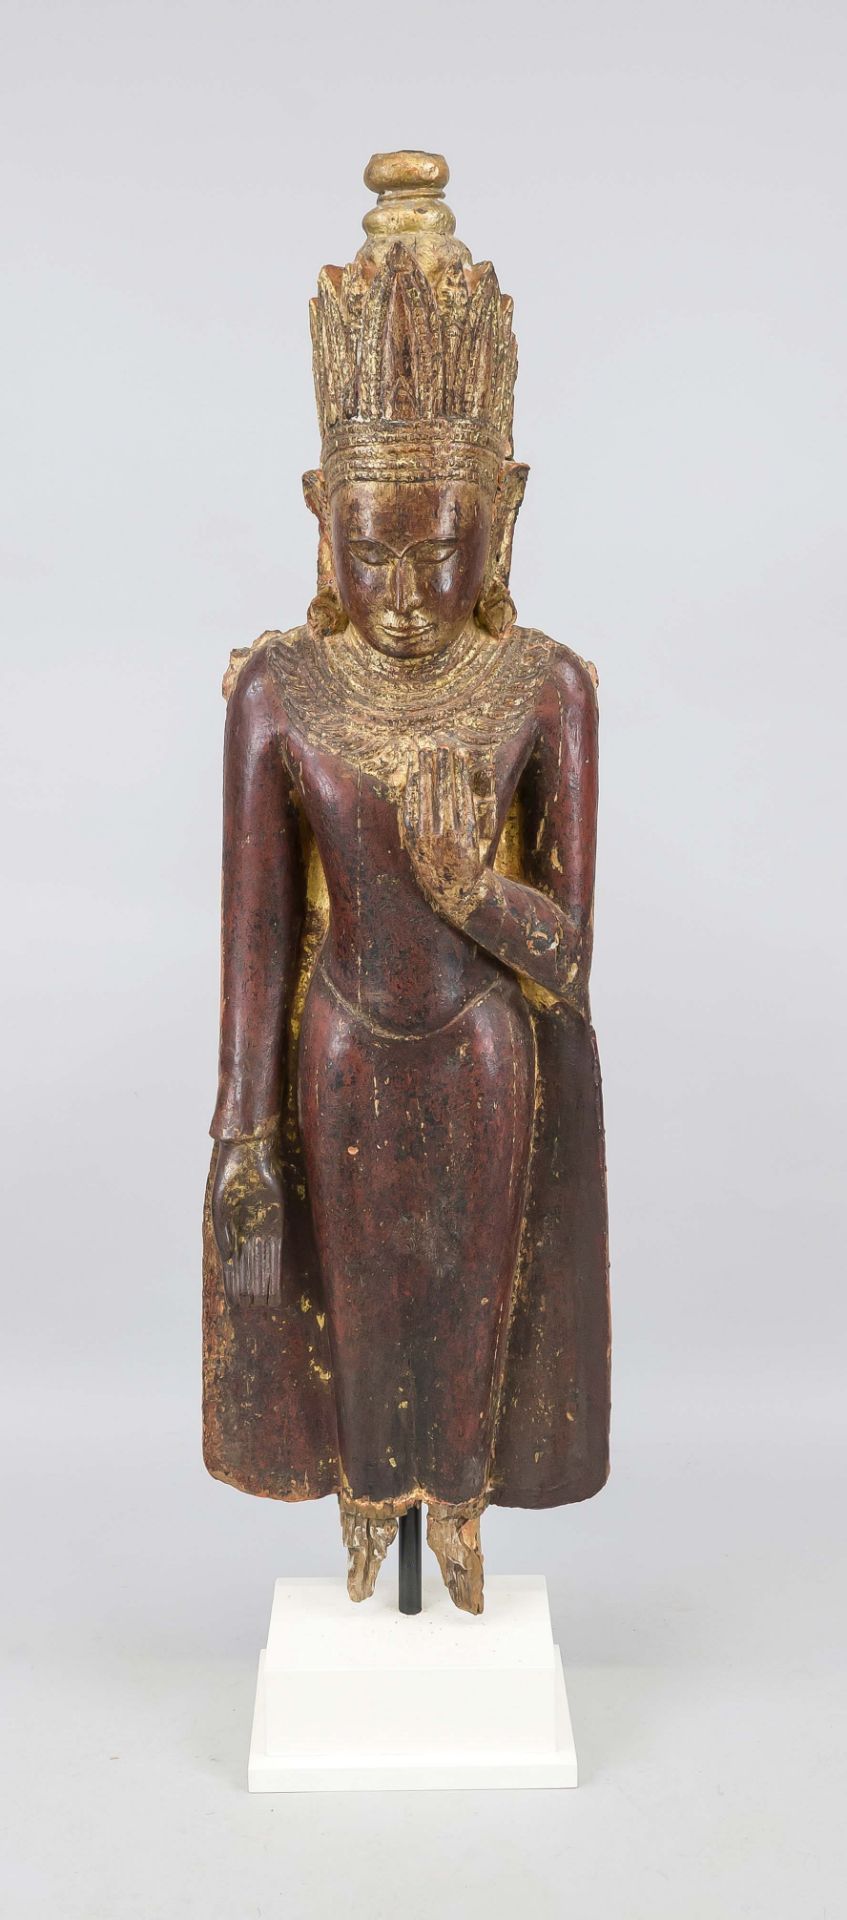 Large Buddha in Bagan style, Burma, exact age uncertain. Wood with remnants of old paint and gold.